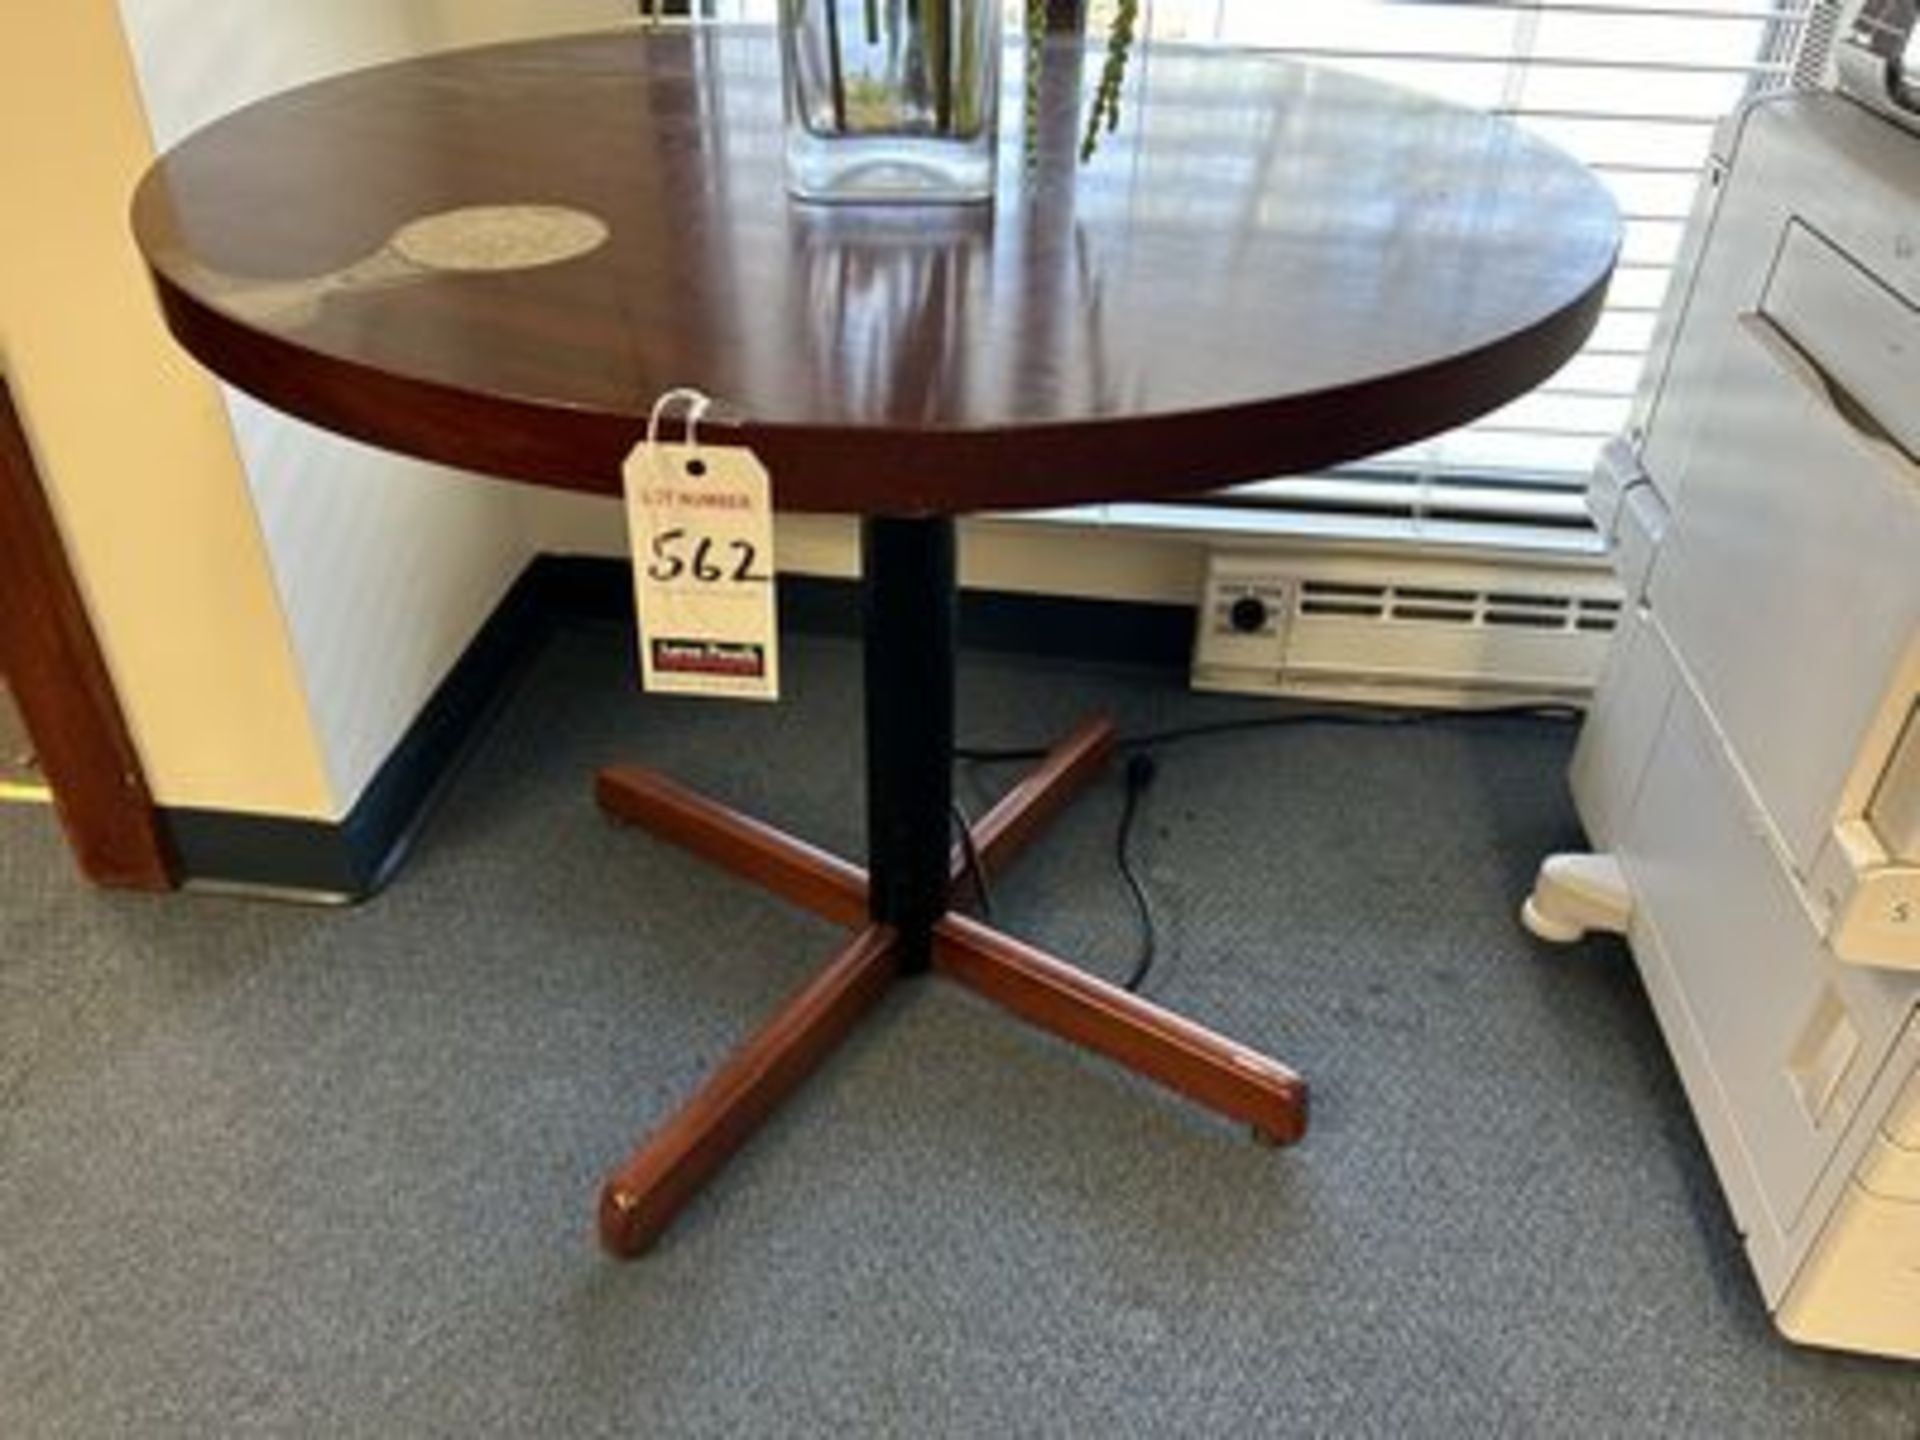 36" DIA. S.P. WOOD TOP TABLE